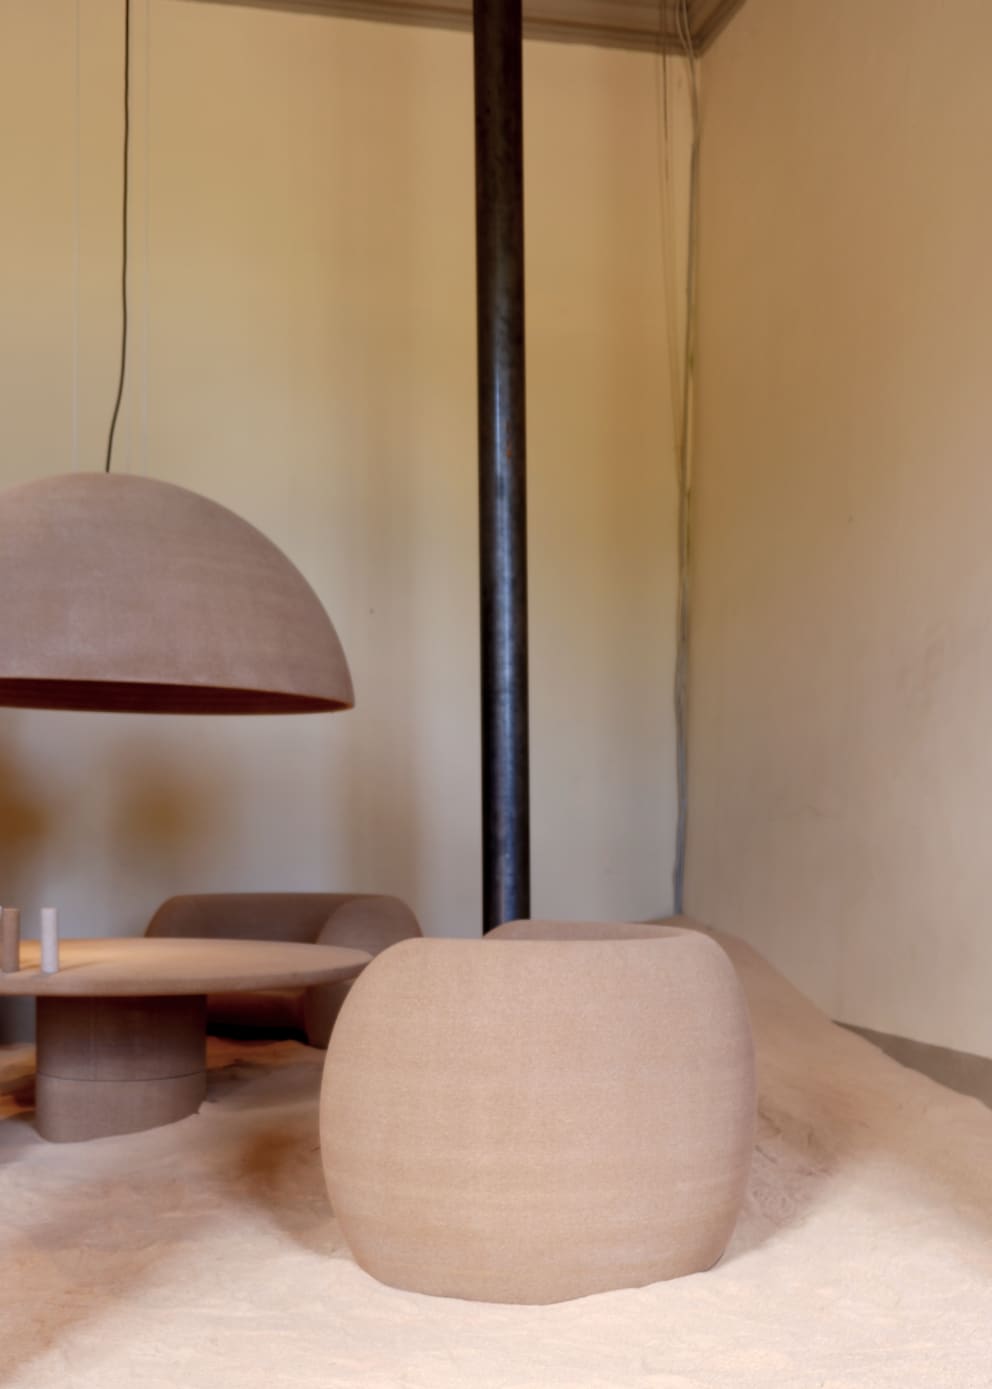 Harry Thaler's furniture appears warm, organic - and as if from another planet.